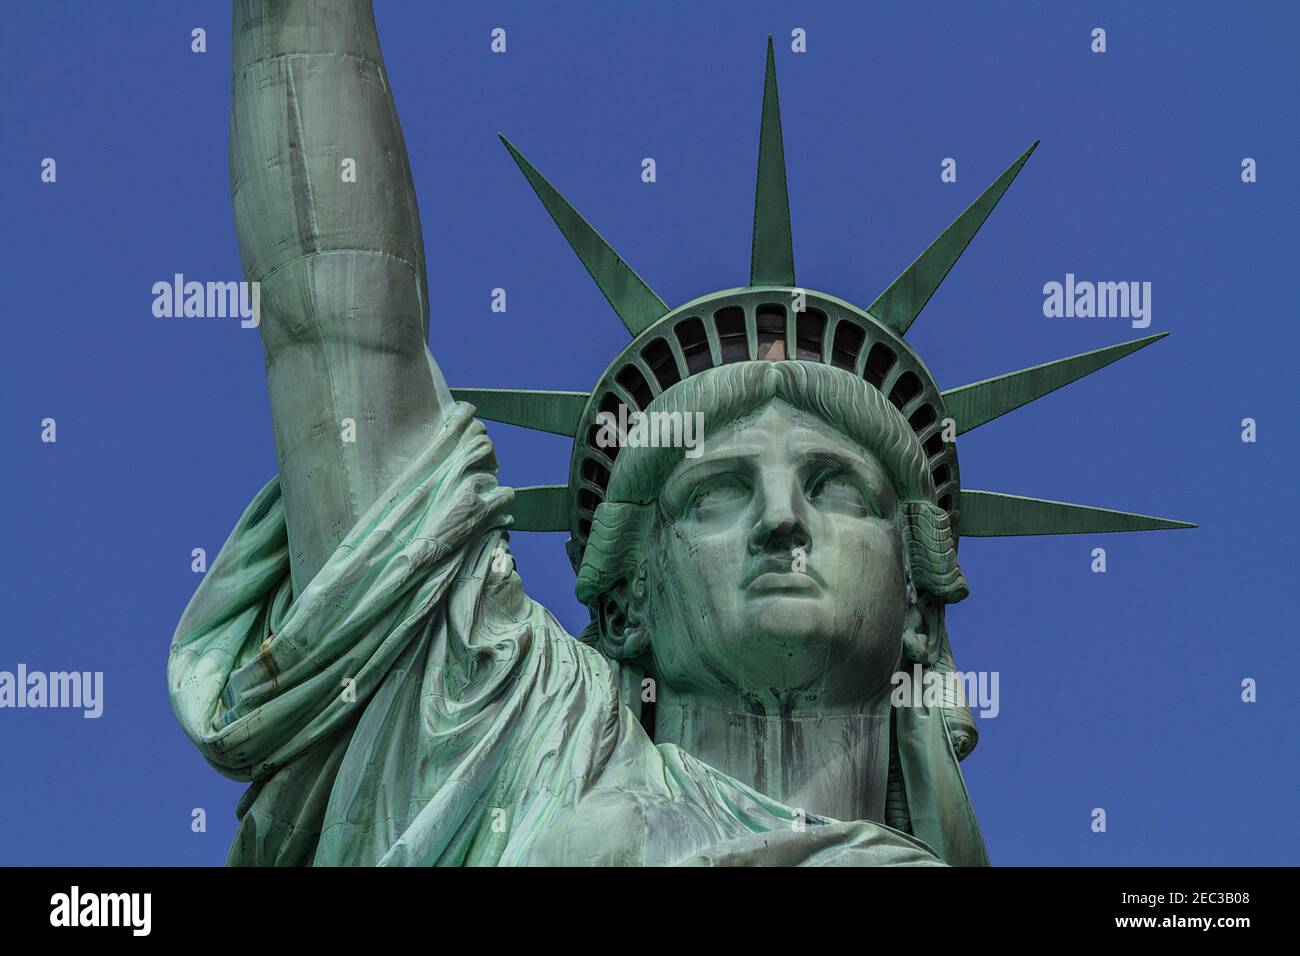 Close up view of the head of the Statue of Liberty with the crown and with the blue sky in the background Stock Photo